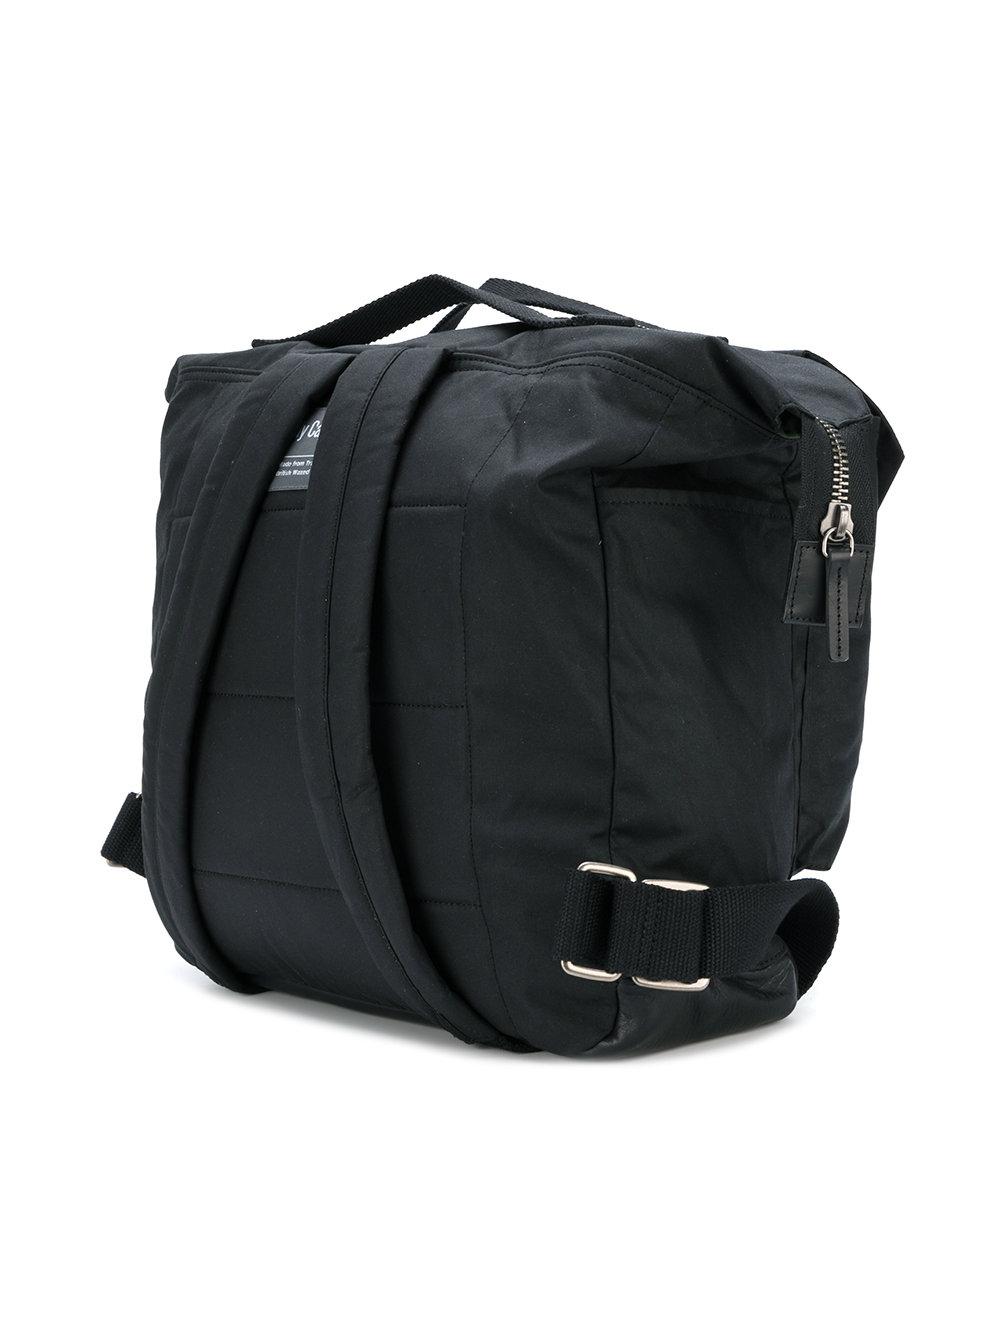 Ally Capellino Cotton Frank Backpack in Black for Men - Lyst